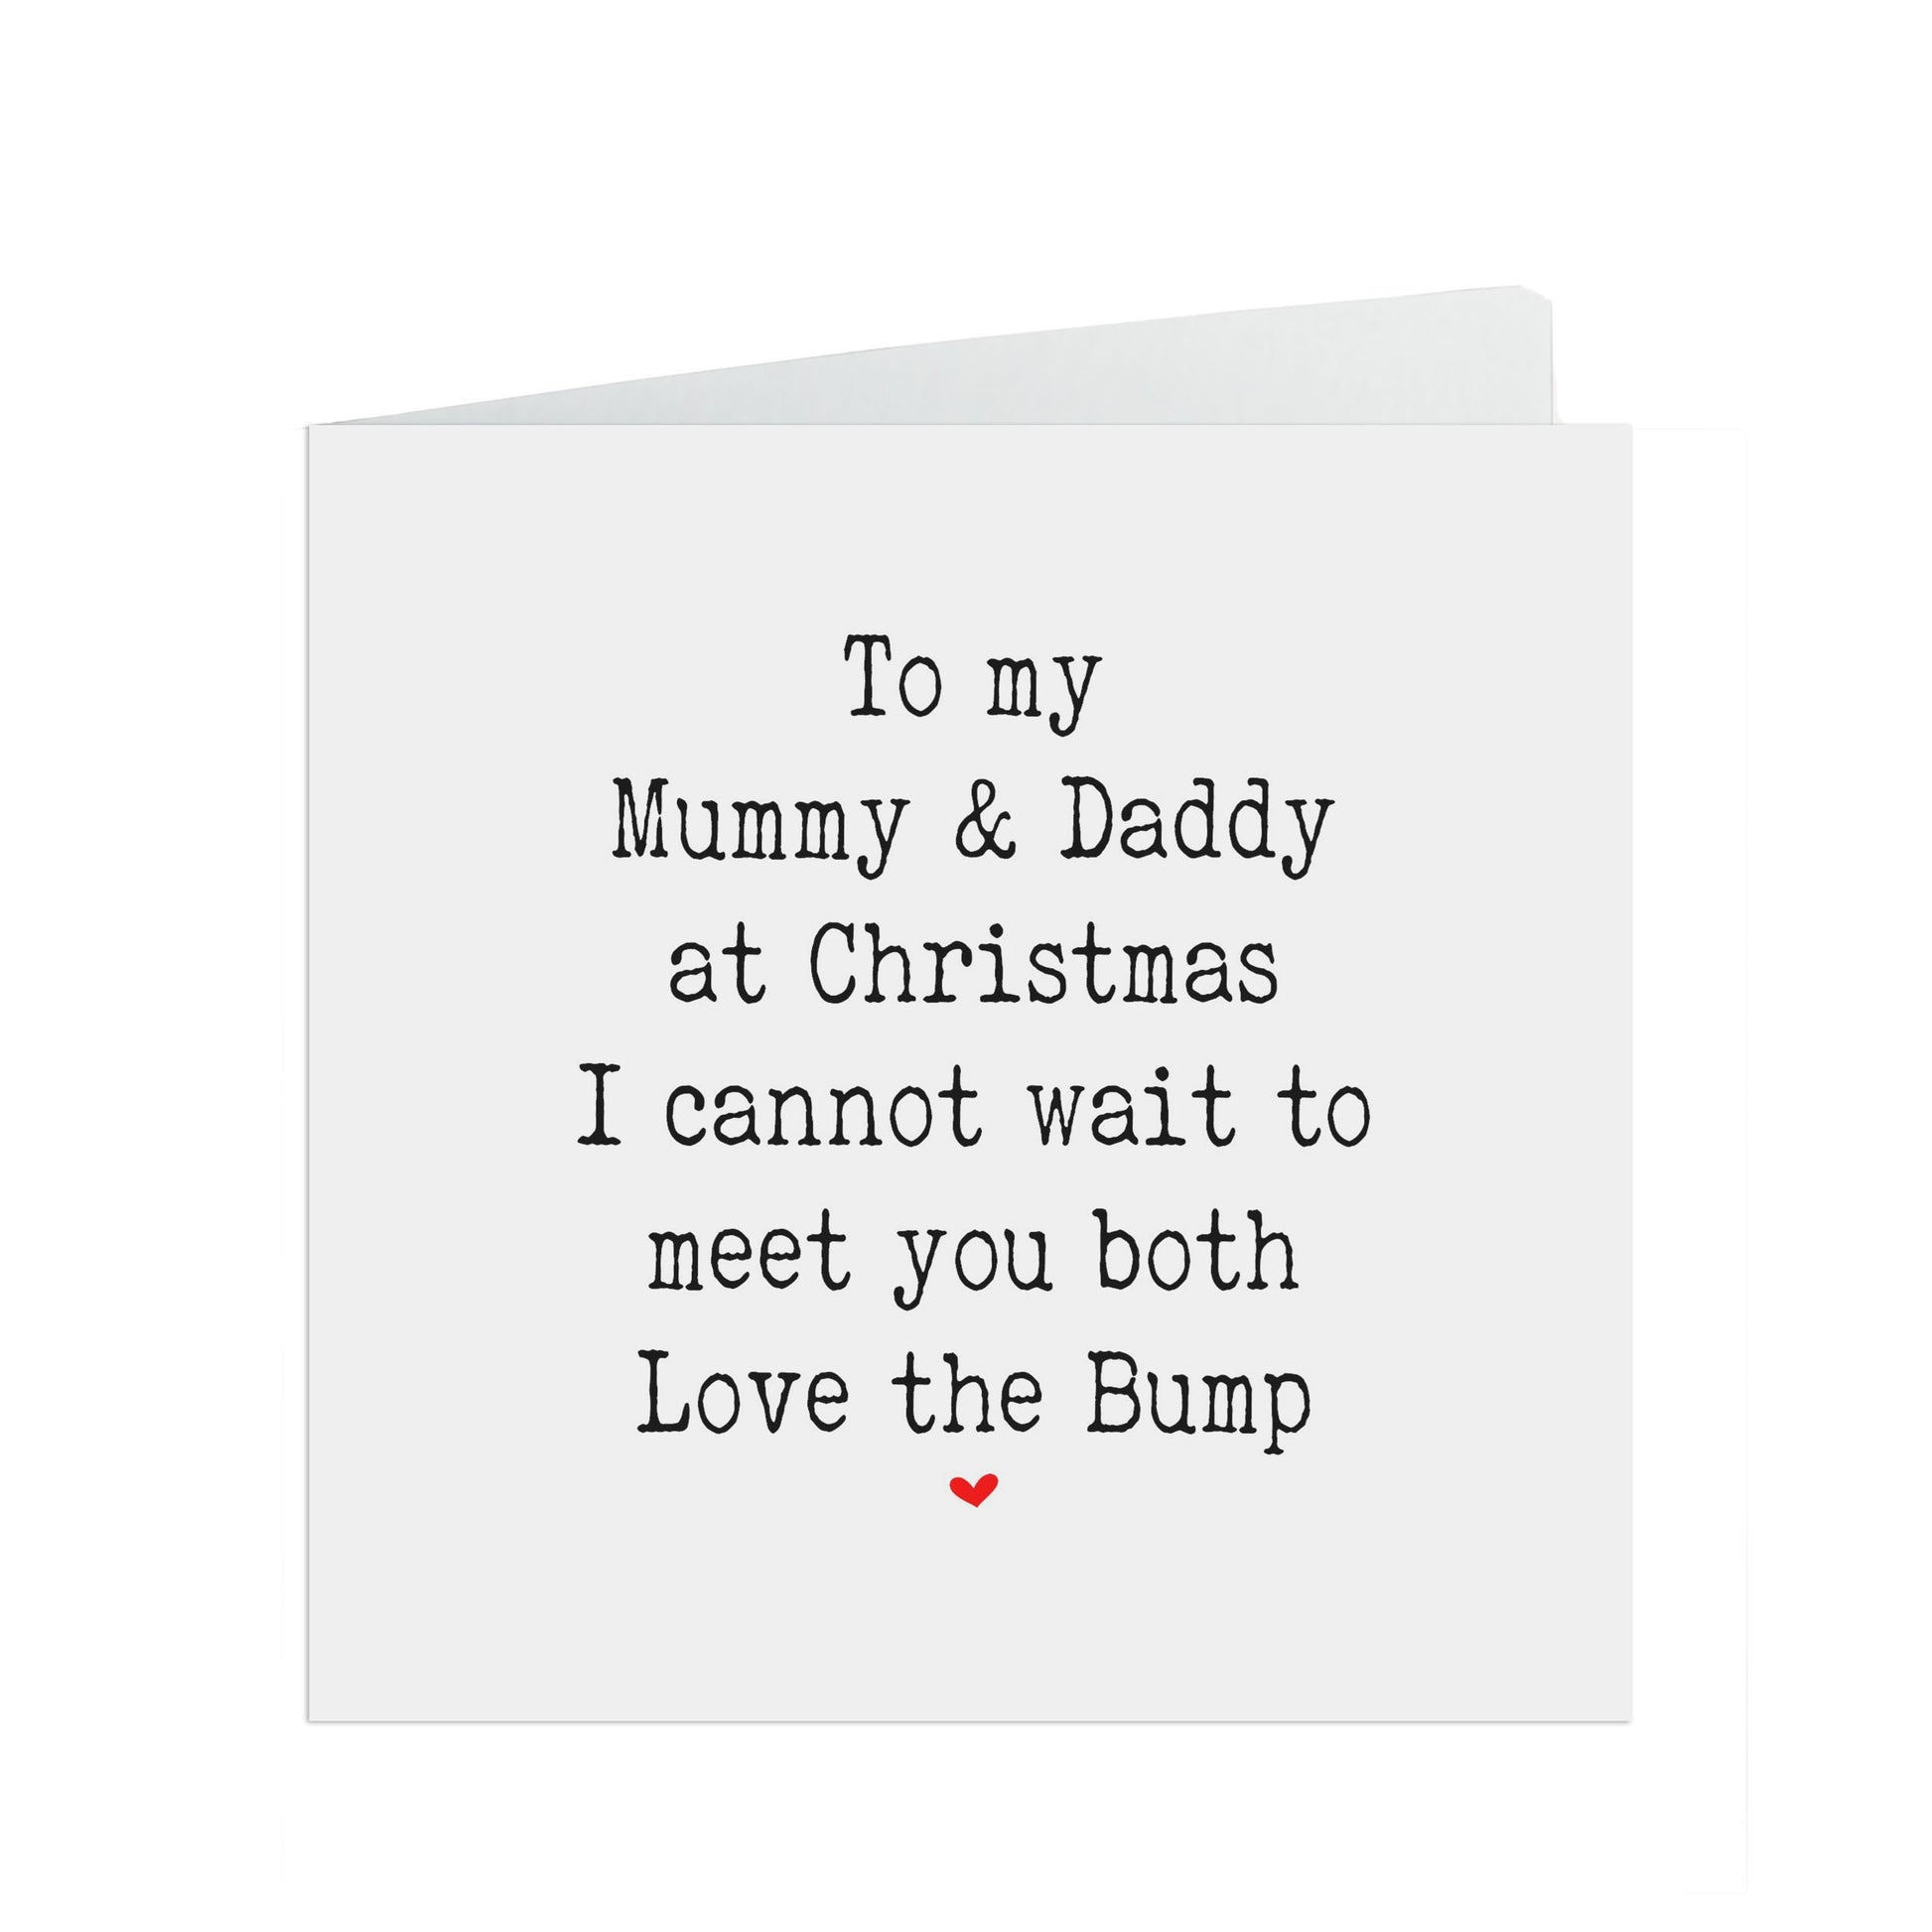 To My Mummy & Daddy, I Cannot Wait To Meet You, Card From The Bump